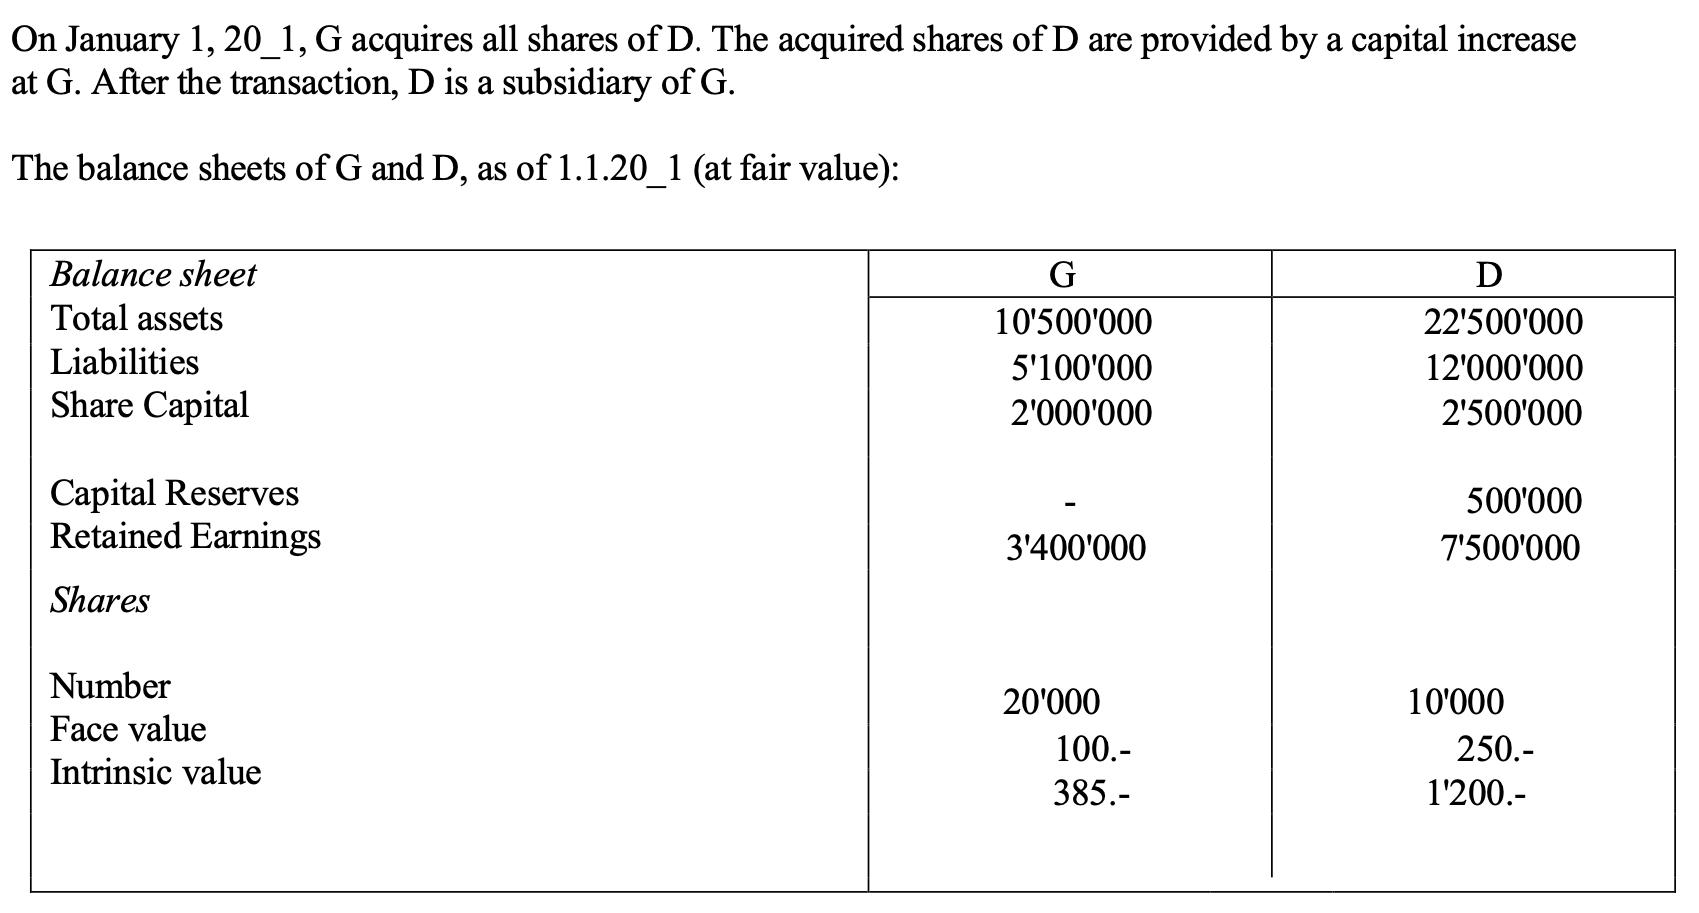 On January 1, 20_1, G acquires all shares of ( mathrm{D} ). The acquired shares of ( mathrm{D} ) are provided by a capi